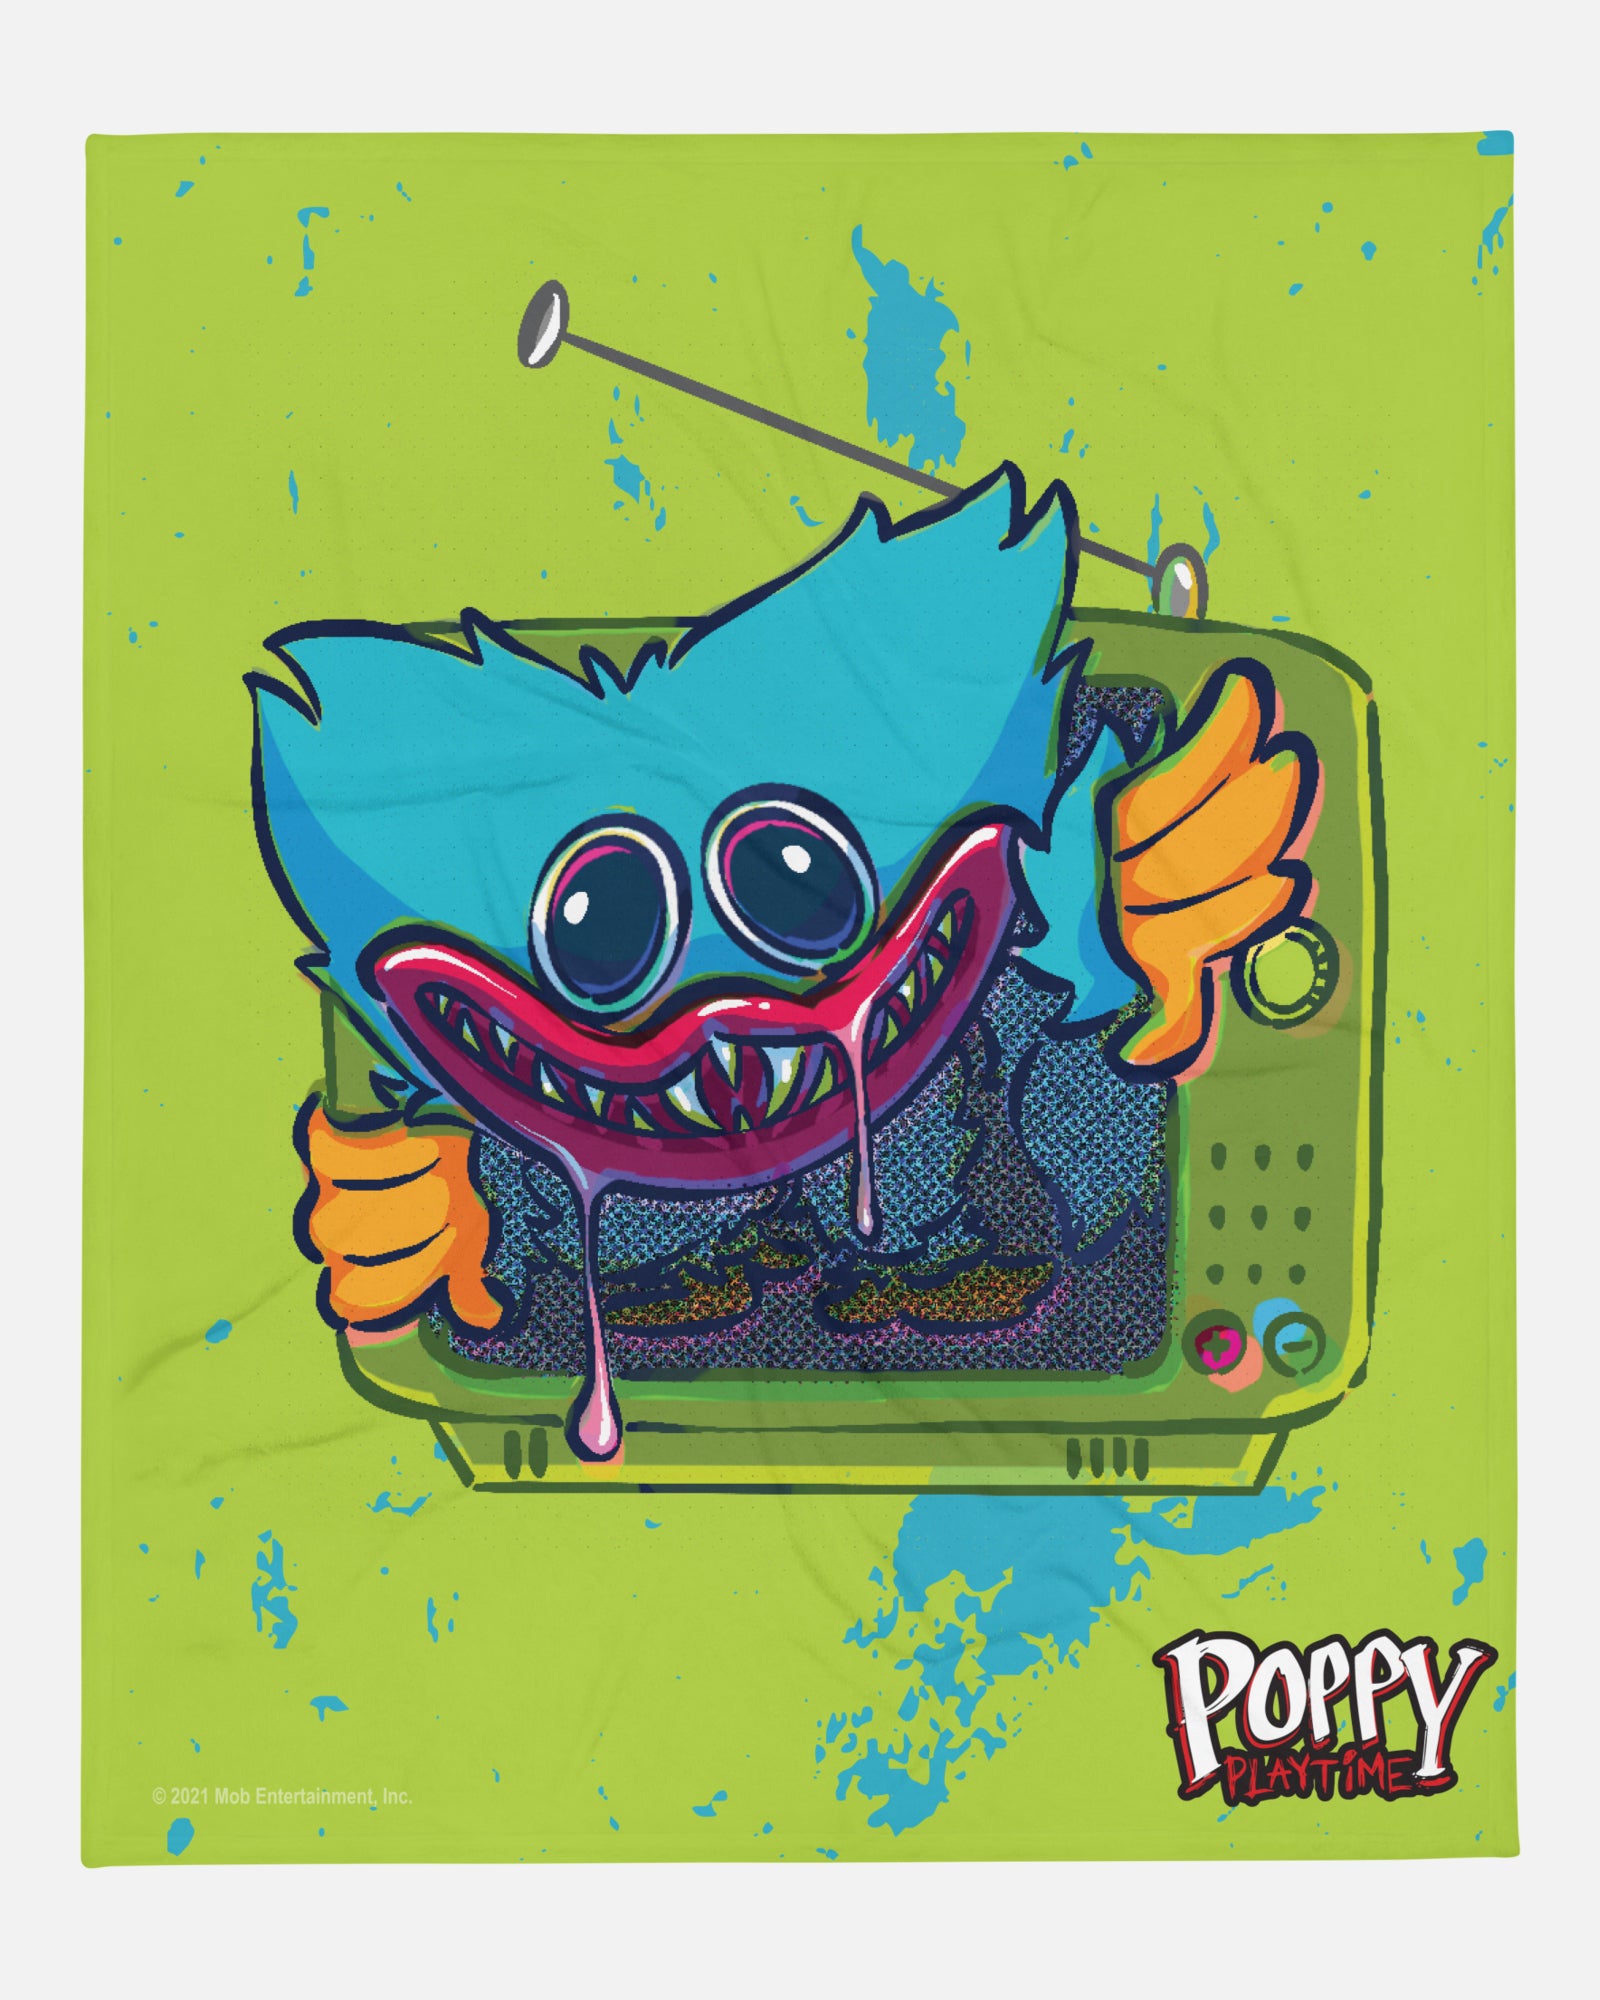 huggy wuggy tv blanket. image: evil huggy wuggy coming out of old tv set. text: poppy playtime